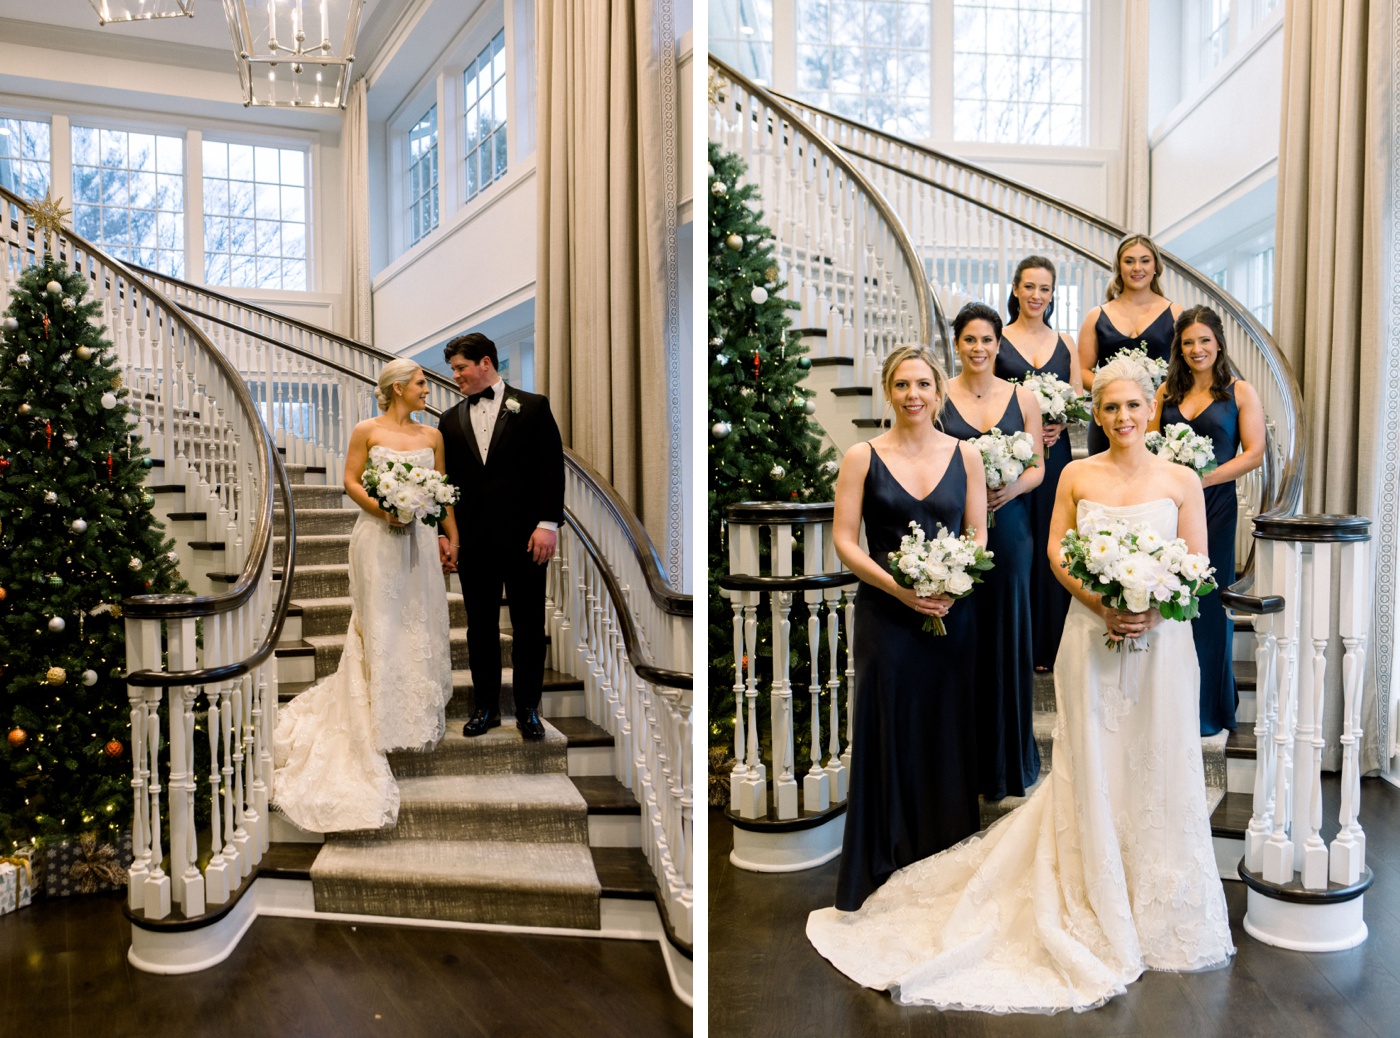 Bridal party portraits at Oakley Country Club